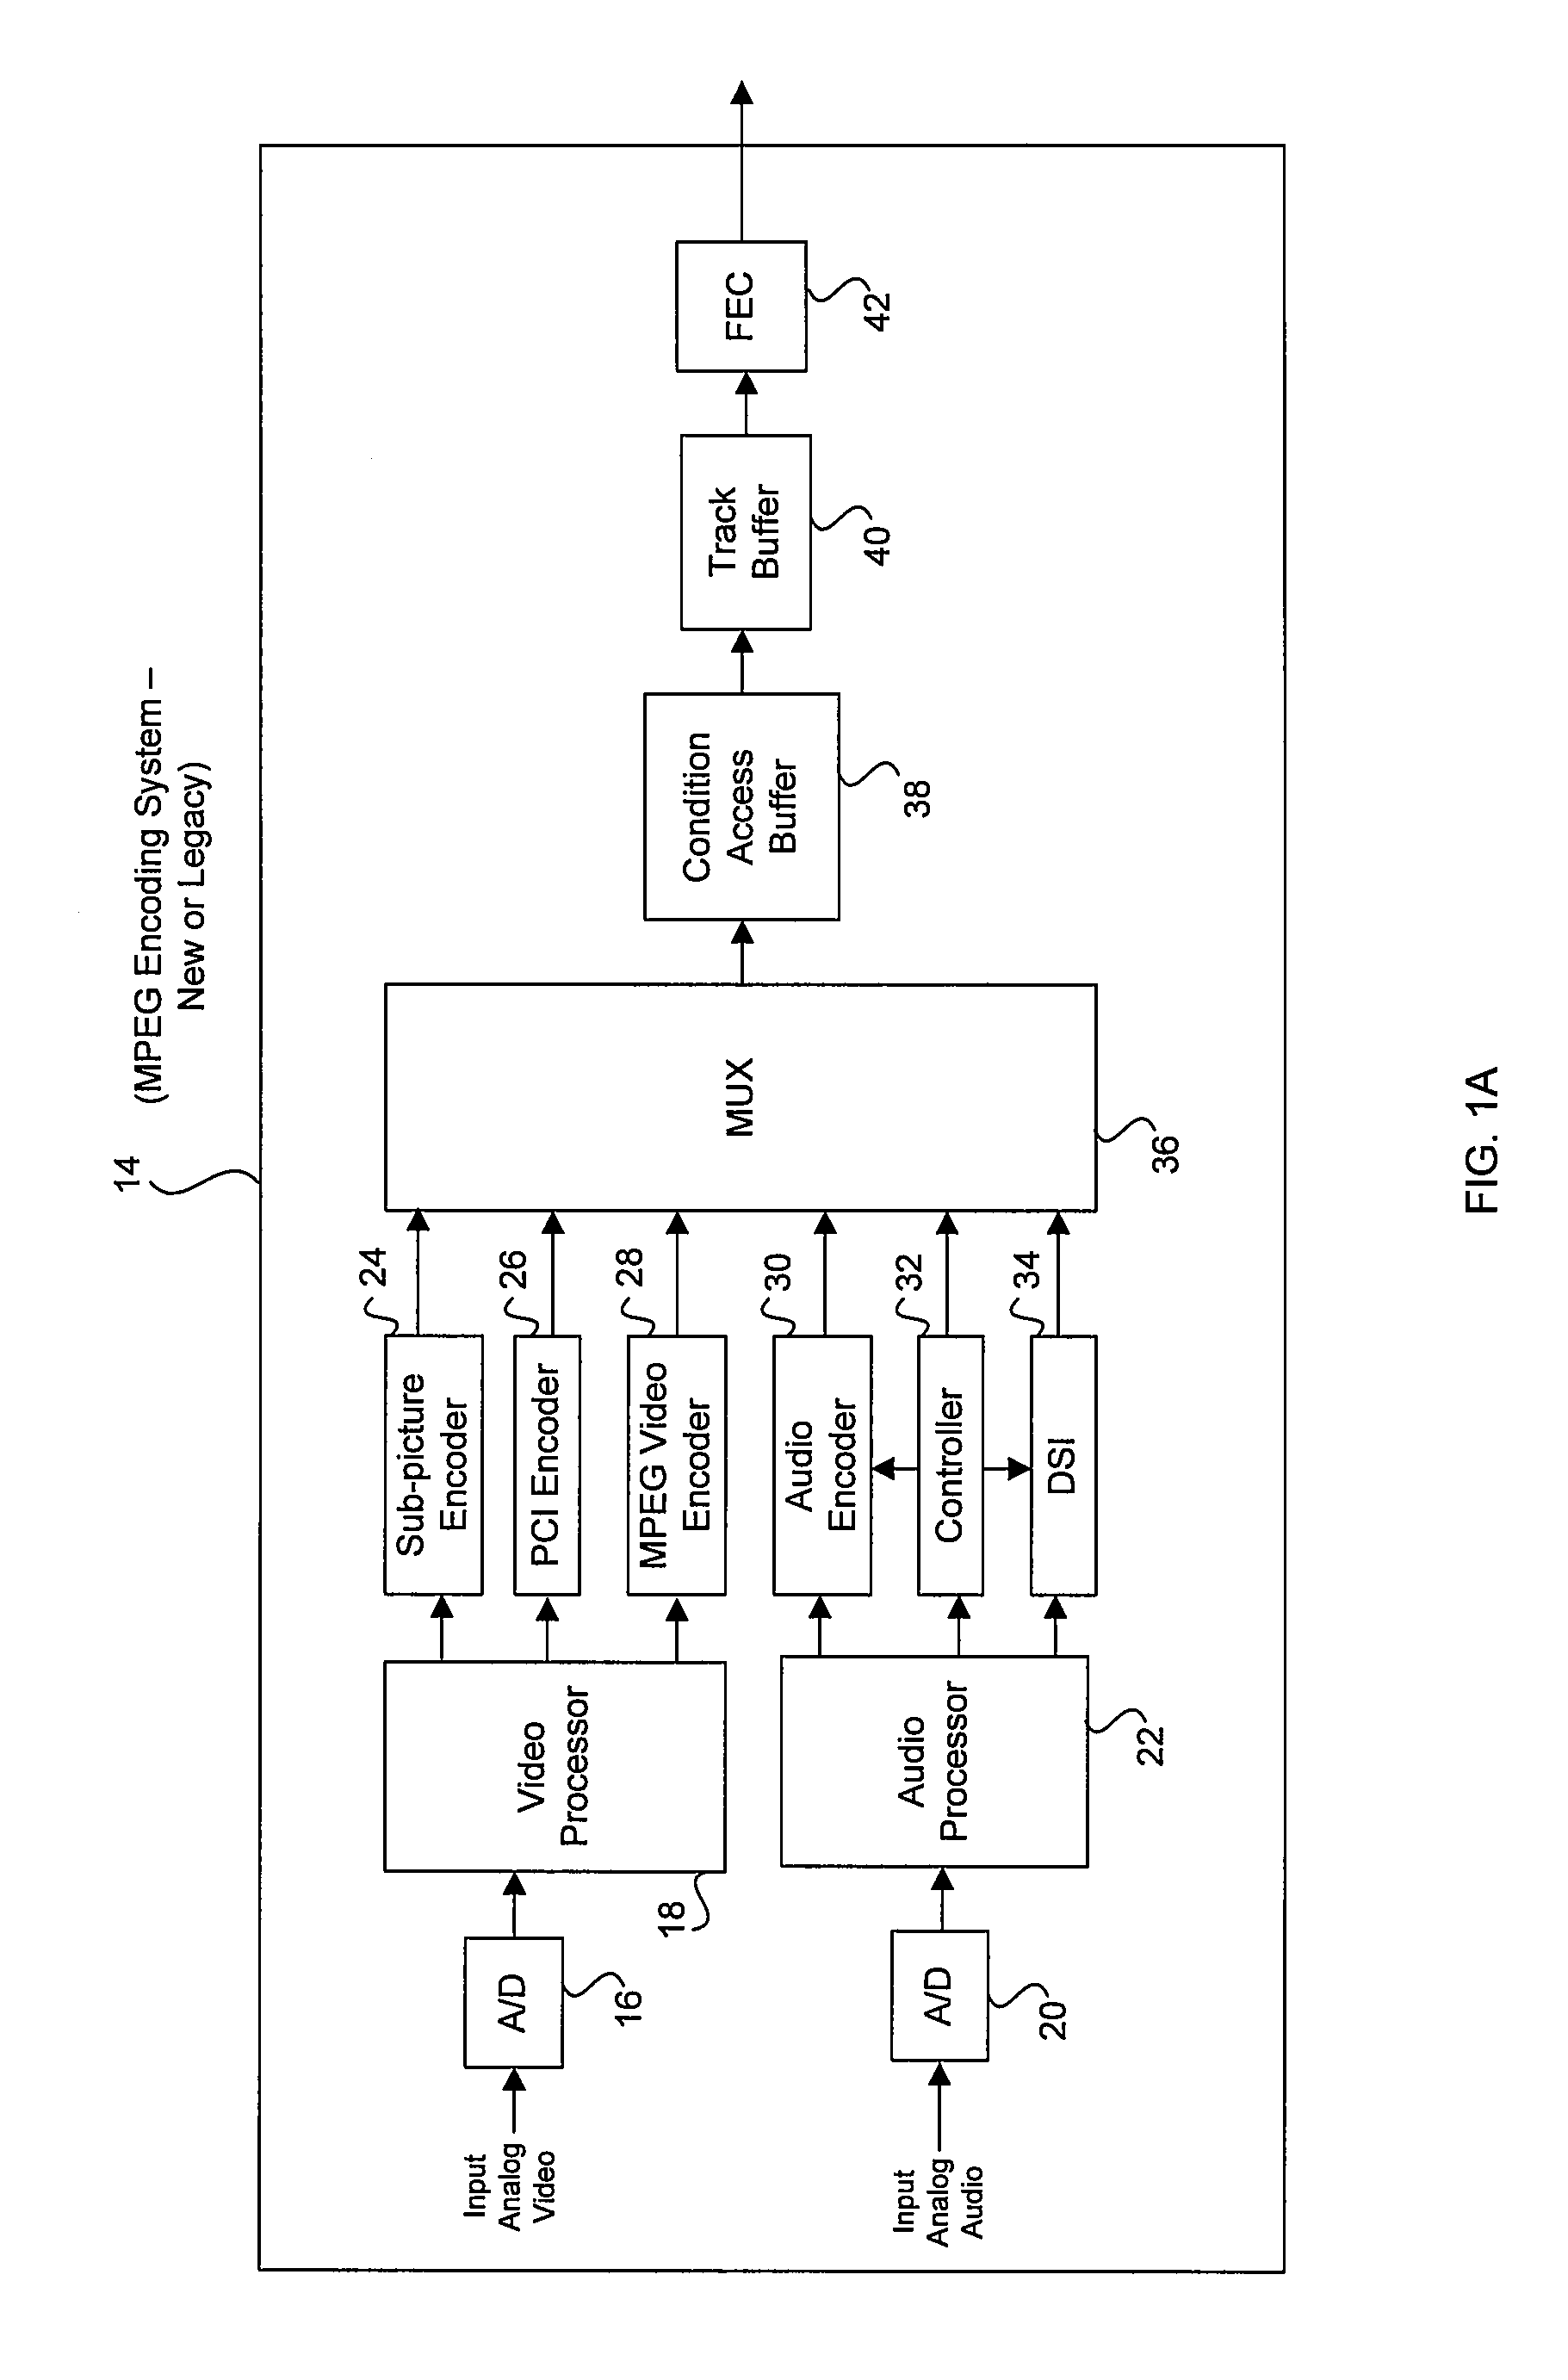 Method and system for co-relating transport packets on different channels using a packet prioritization scheme